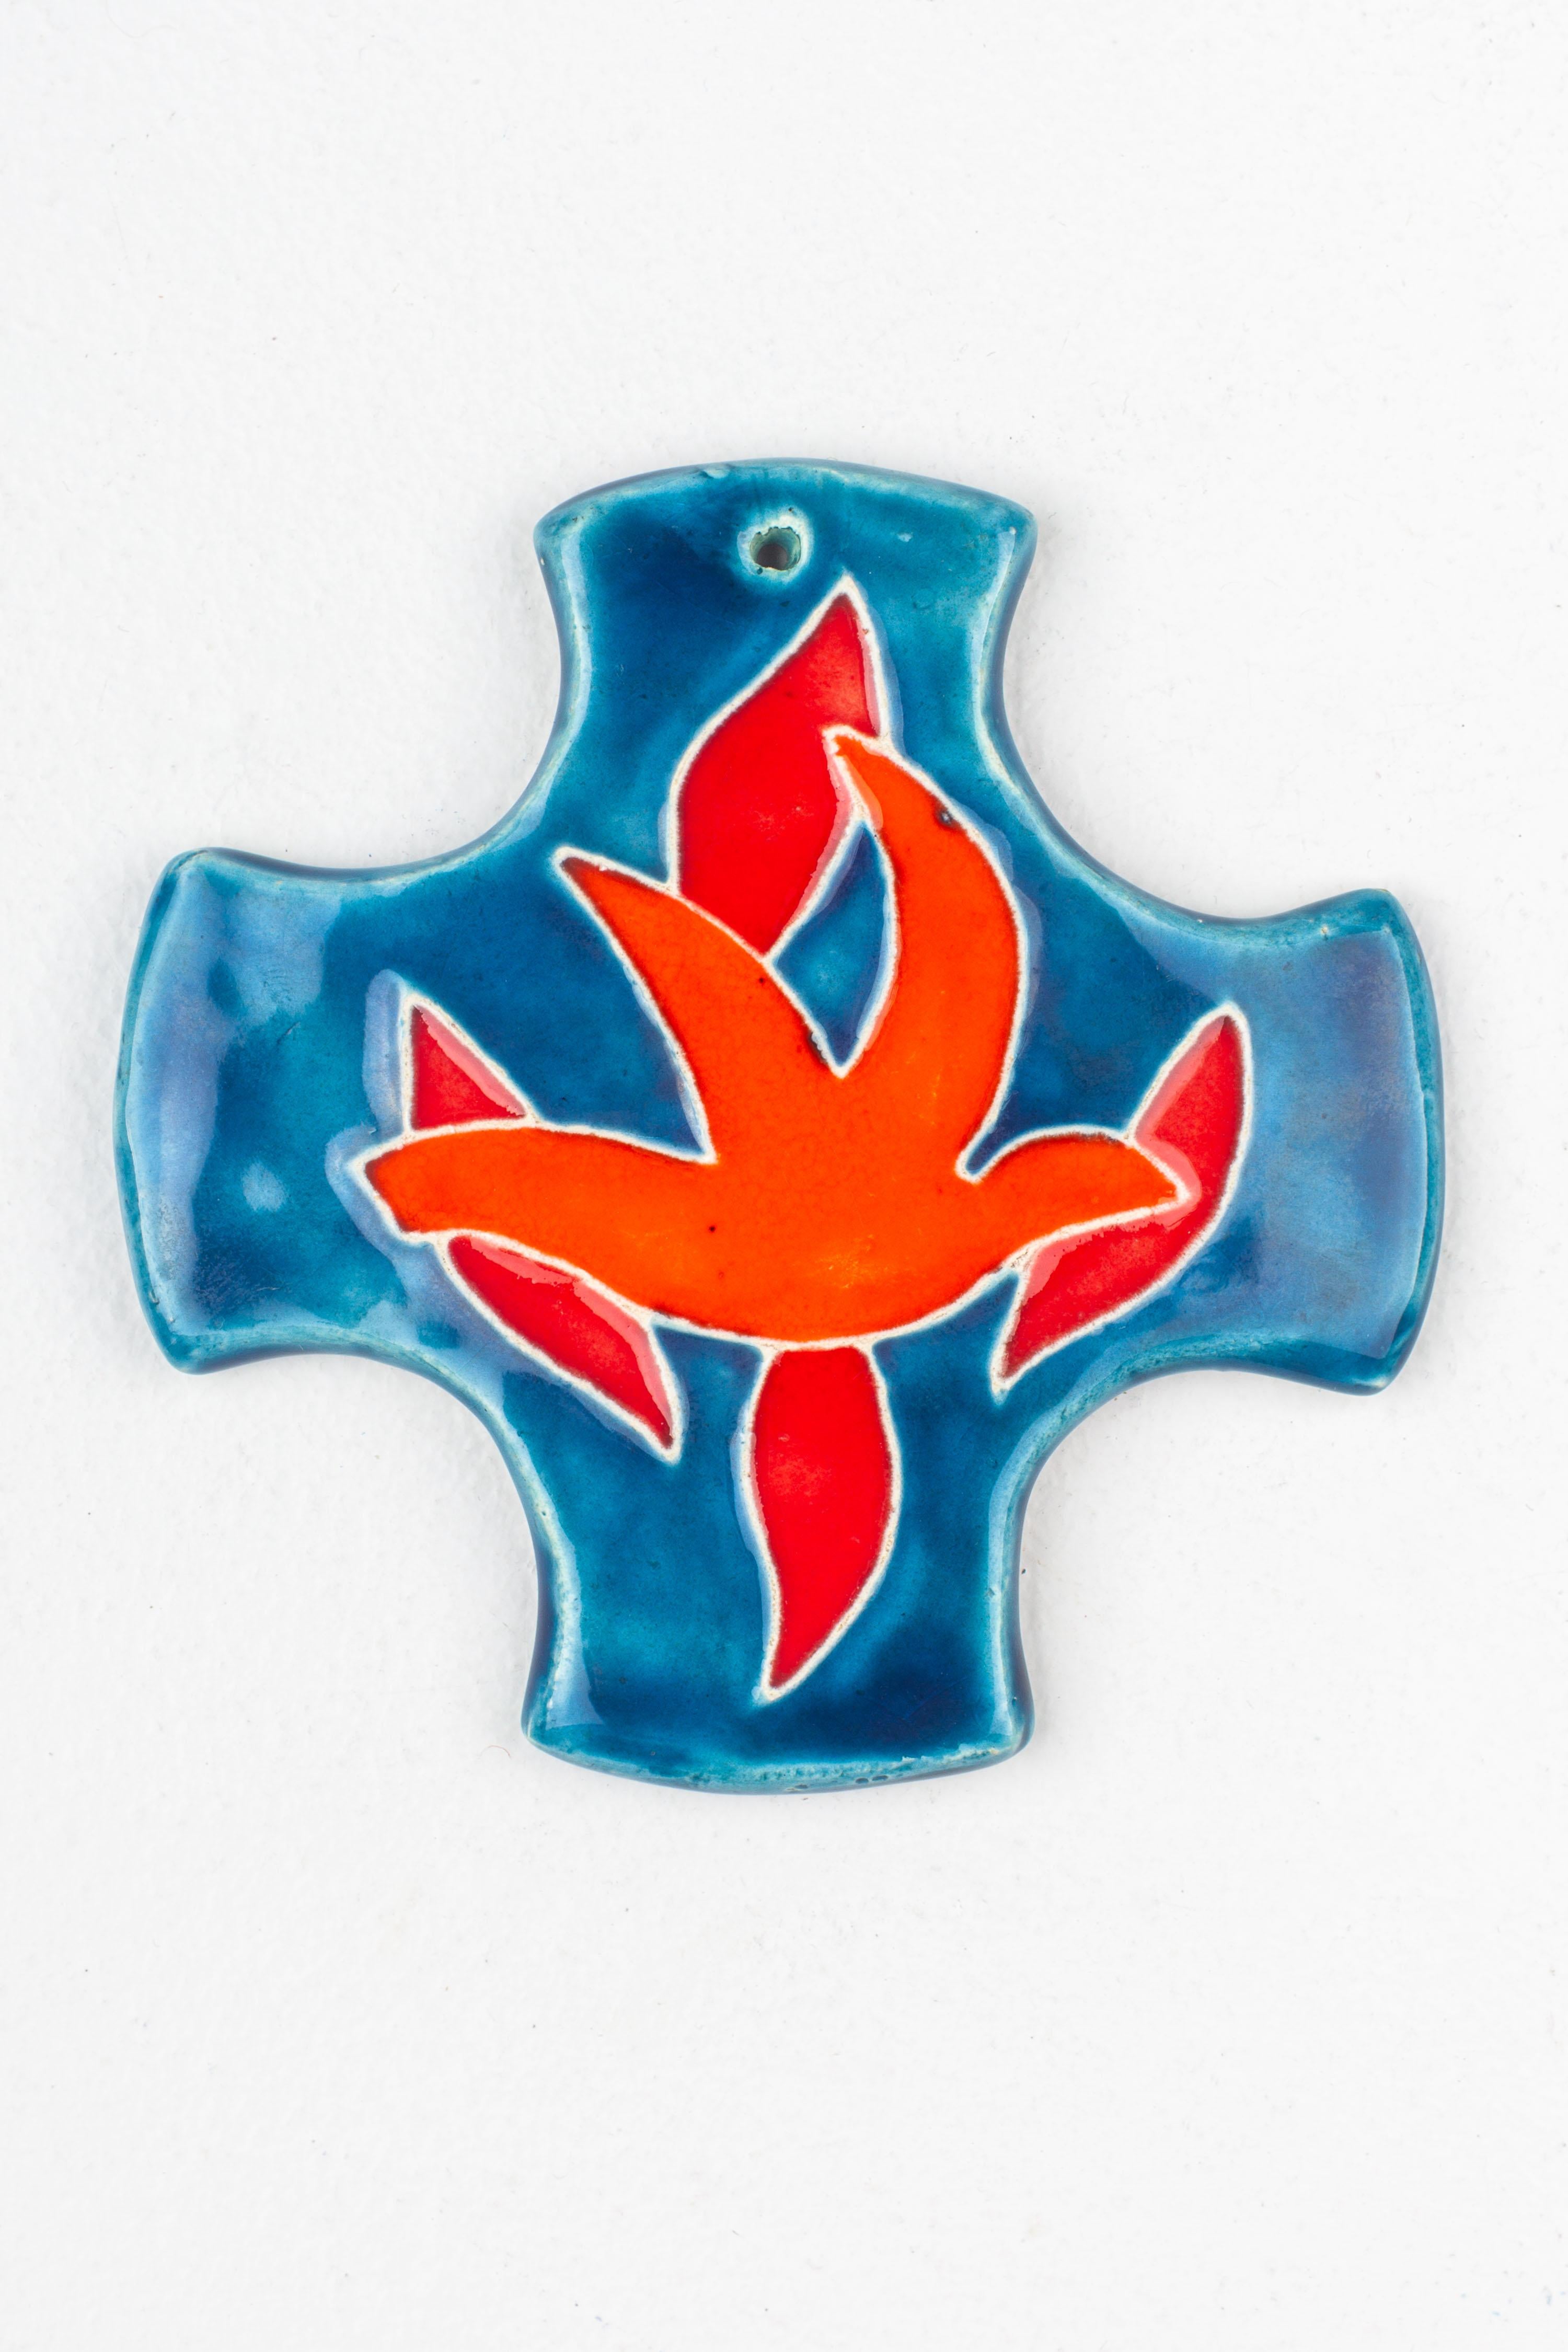 This captivating mid-century modern ceramic cross is a fine example of the era's innovative approach to traditional religious symbolism. Crafted by European studio artists, the cross is distinguished by its bold, abstract central motif, executed in